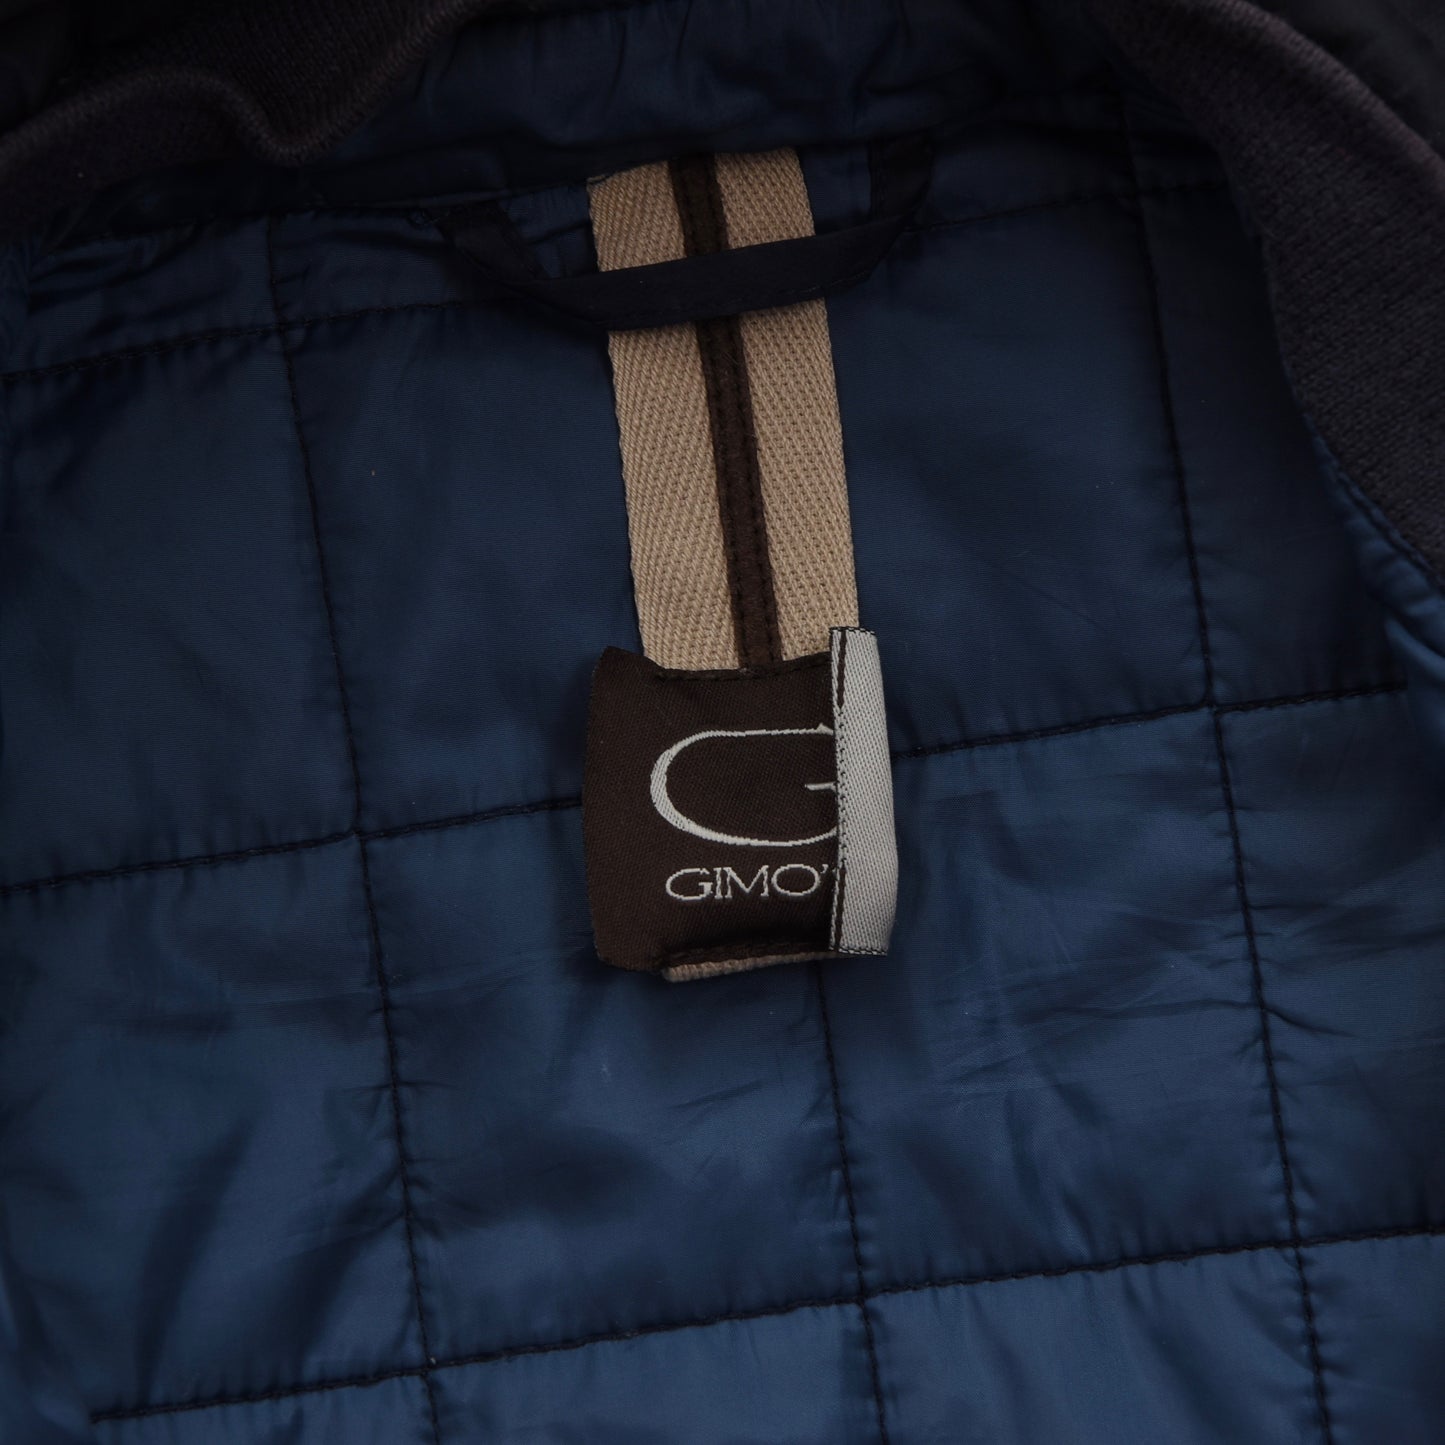 Gimo's Quilted Jacket Size 52 - Navy Blue